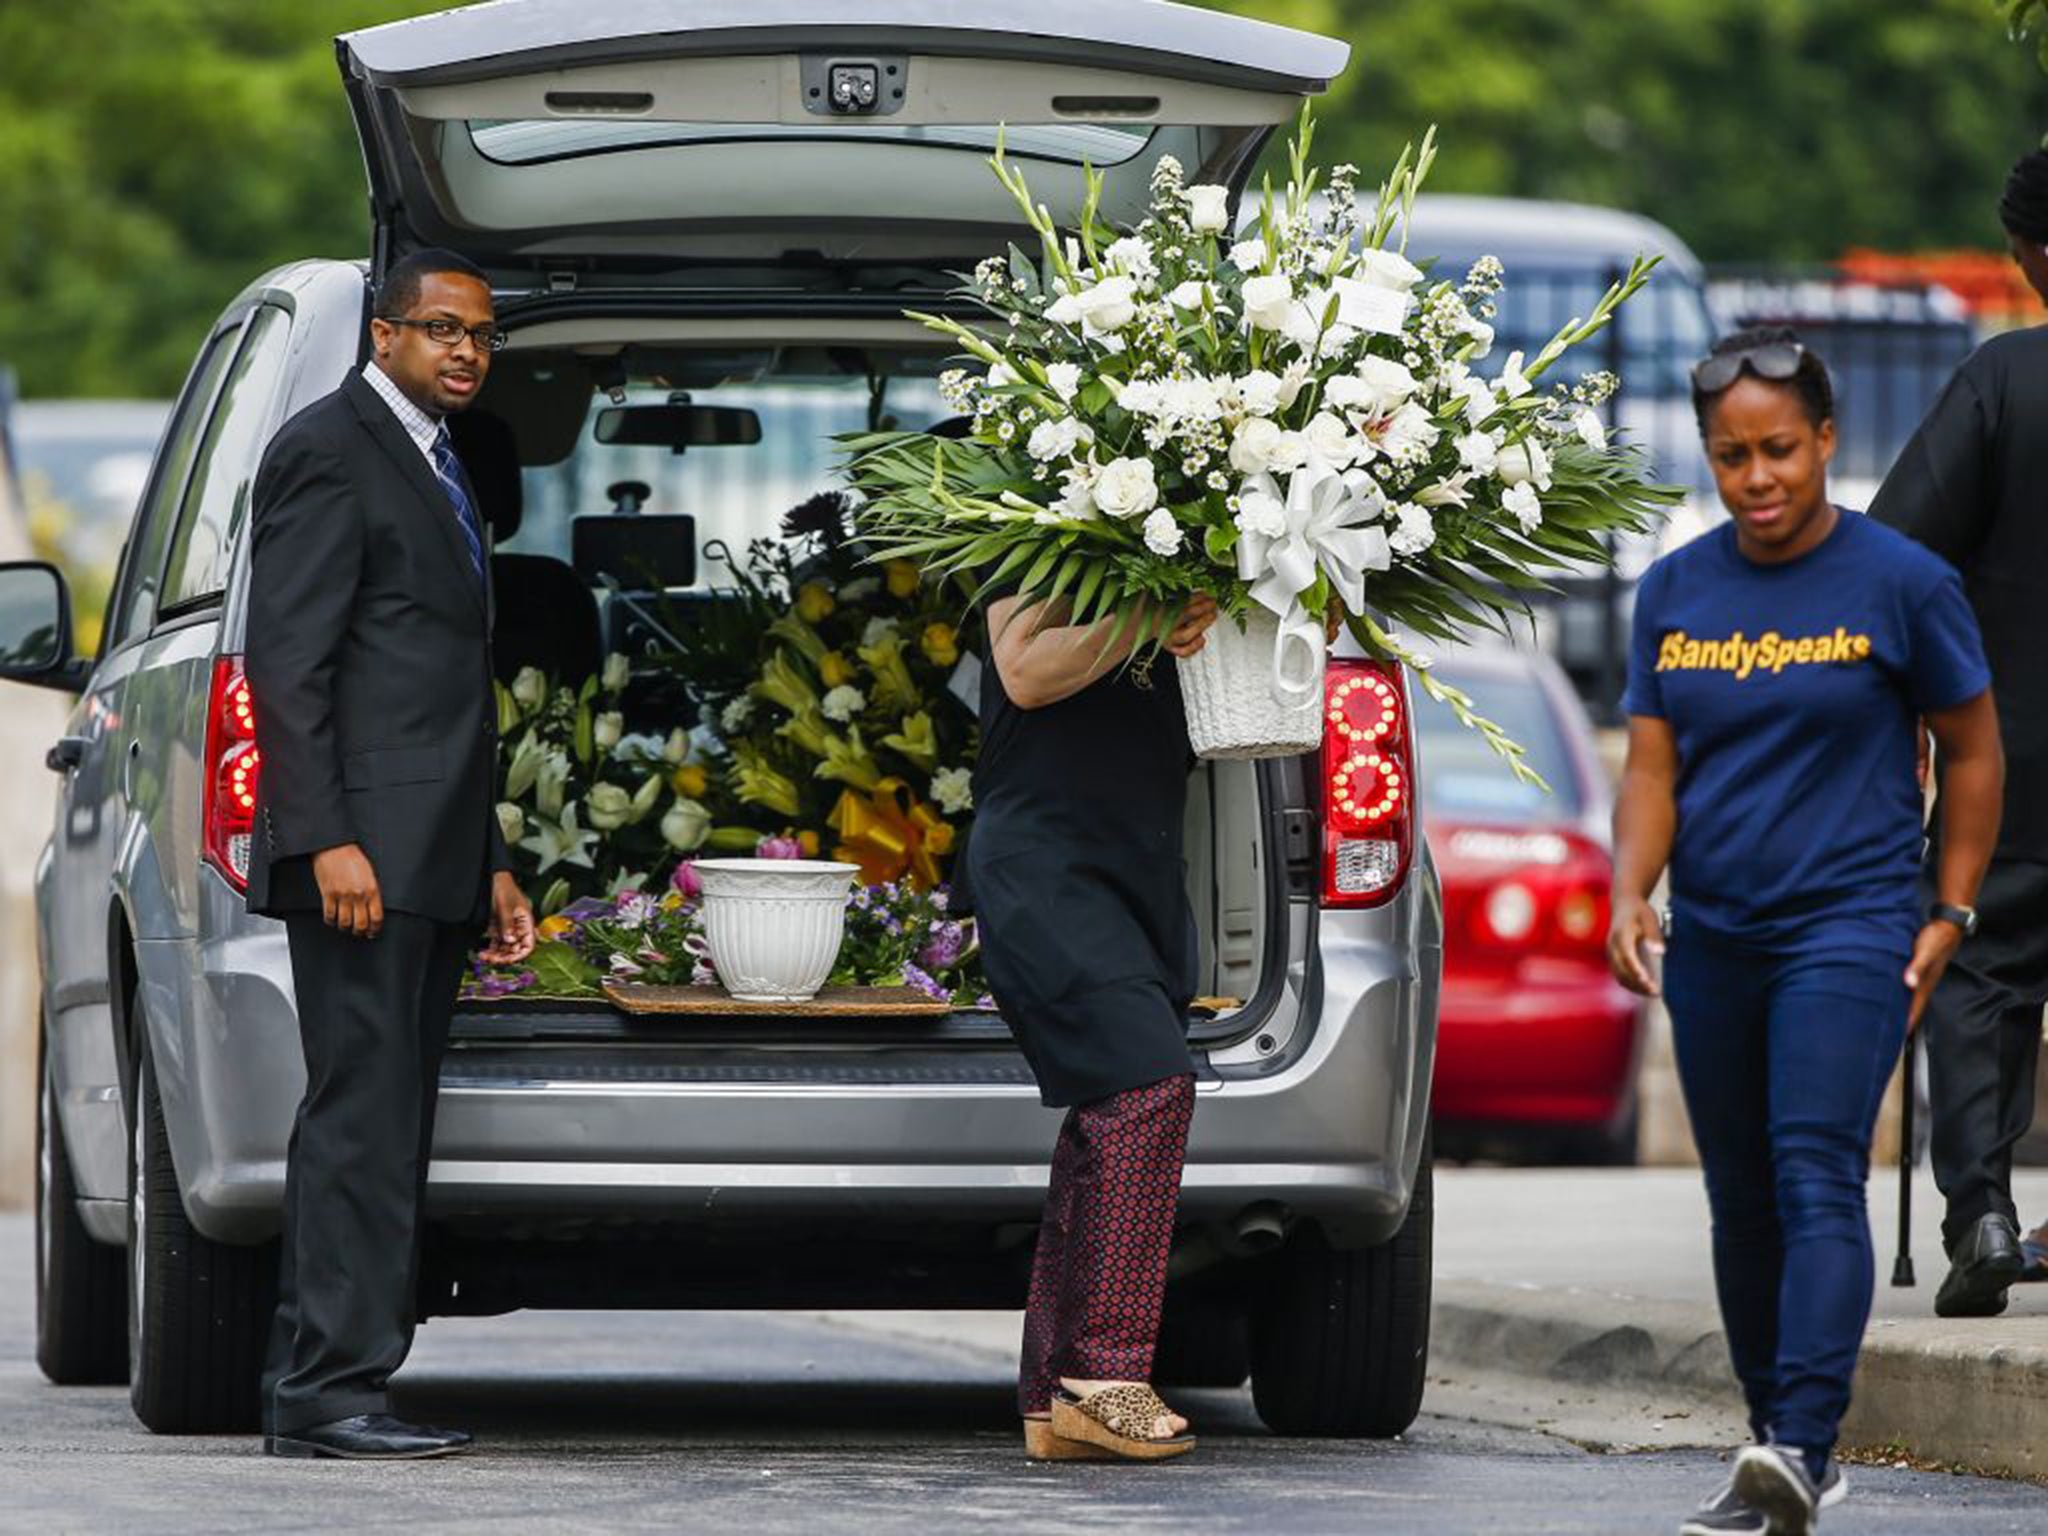 Floral tributes were delivered to the DuPage African Methodist Episcopal Church in Lisle